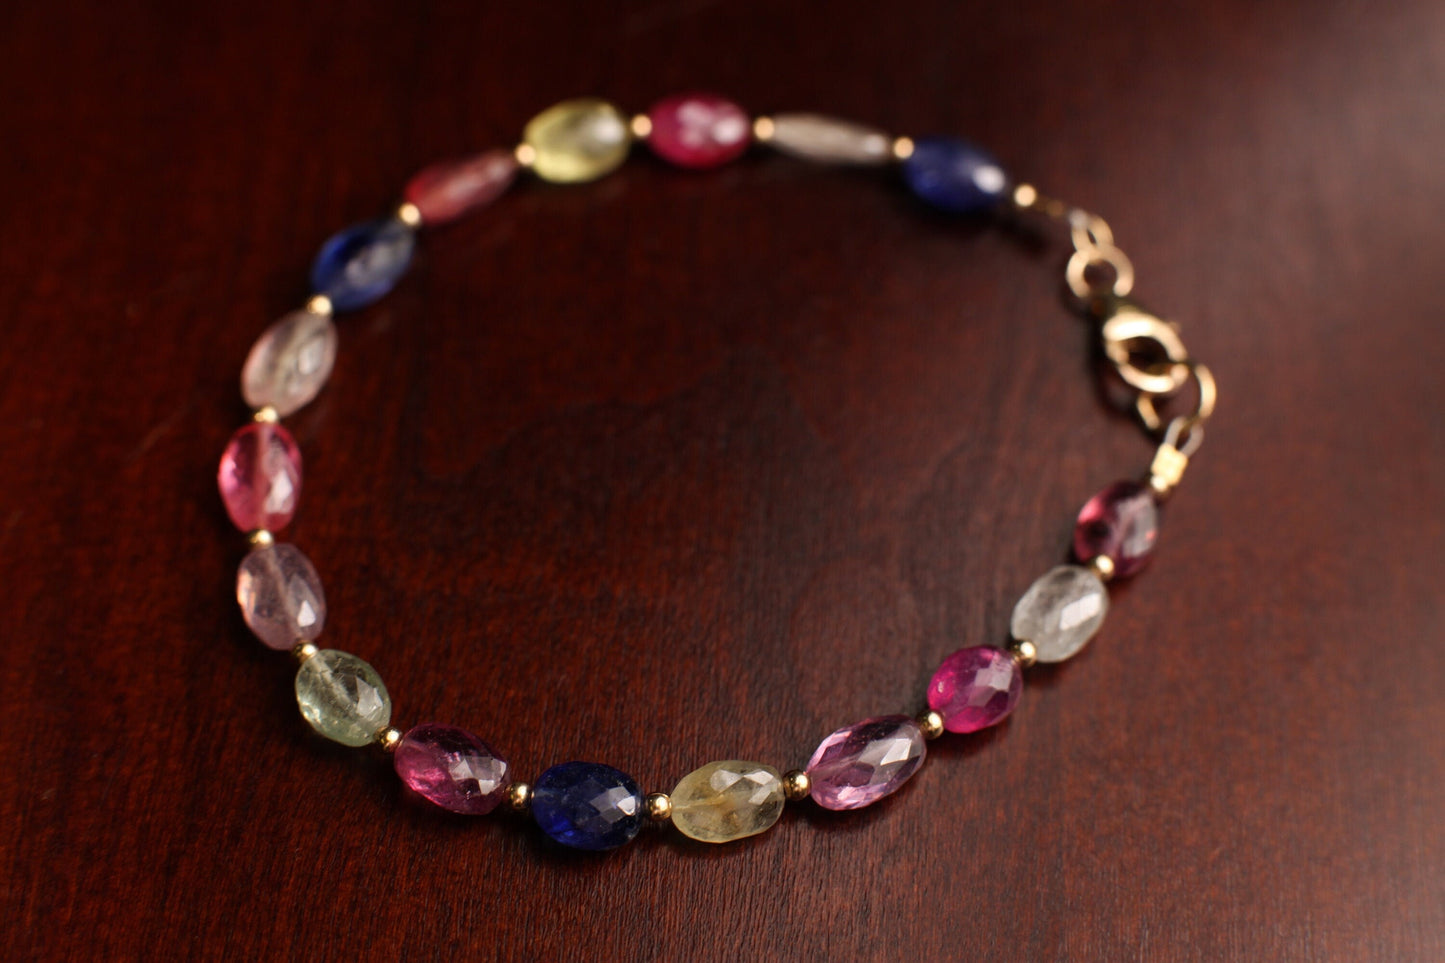 Natural Multi Sapphire 5x7mm Faceted Puffed Oval AAA clear quality Gemstone in 14k Gold Filled spacer and clasp Bracelet. Precious Gift .